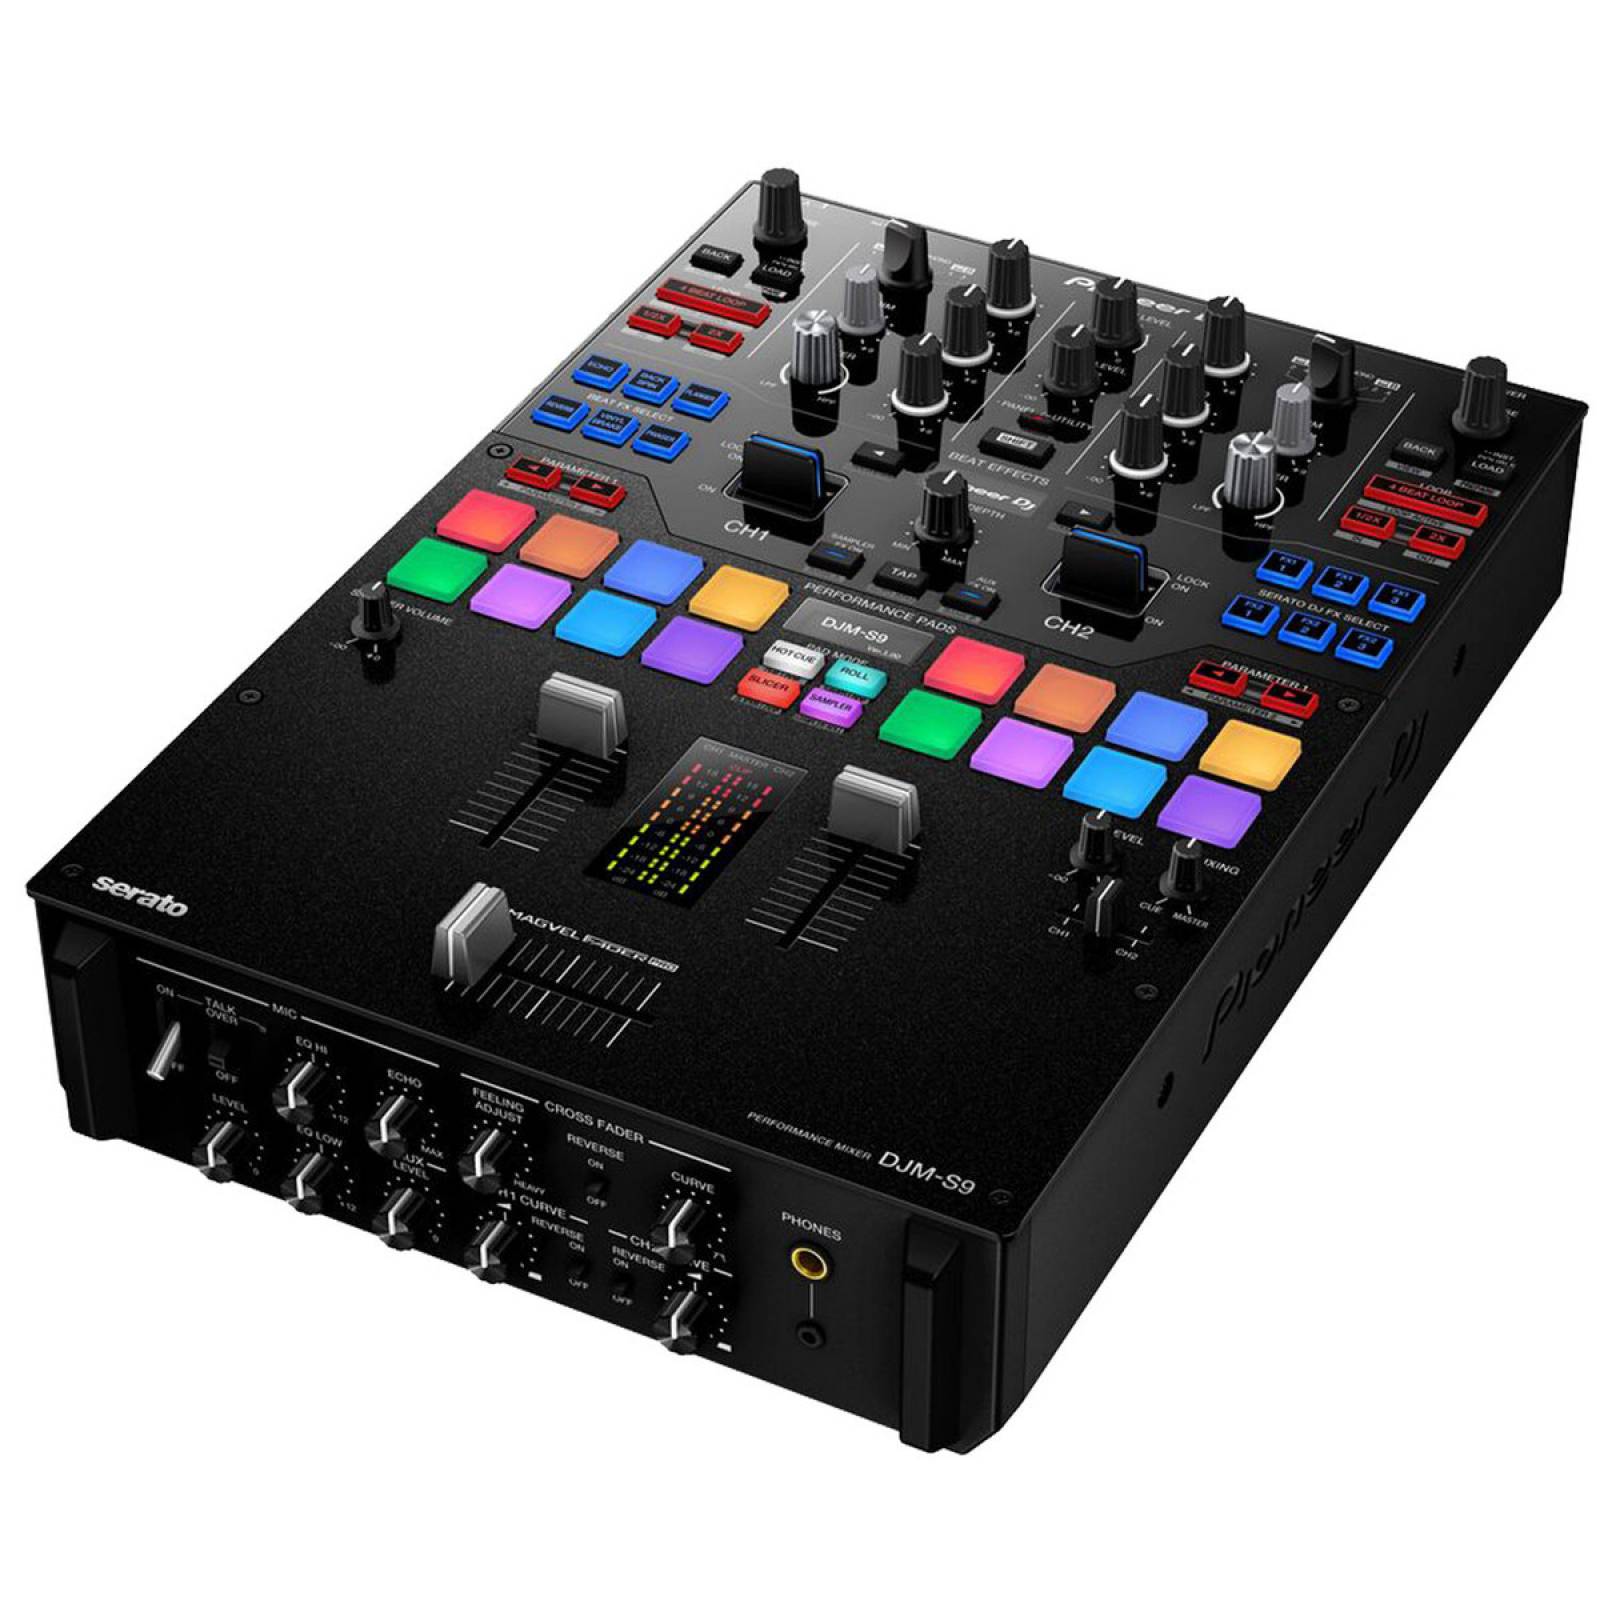 PIONEER DJM-S9 MIXER PROFESIONAL SCRATCH 2 CANALES SERATO 